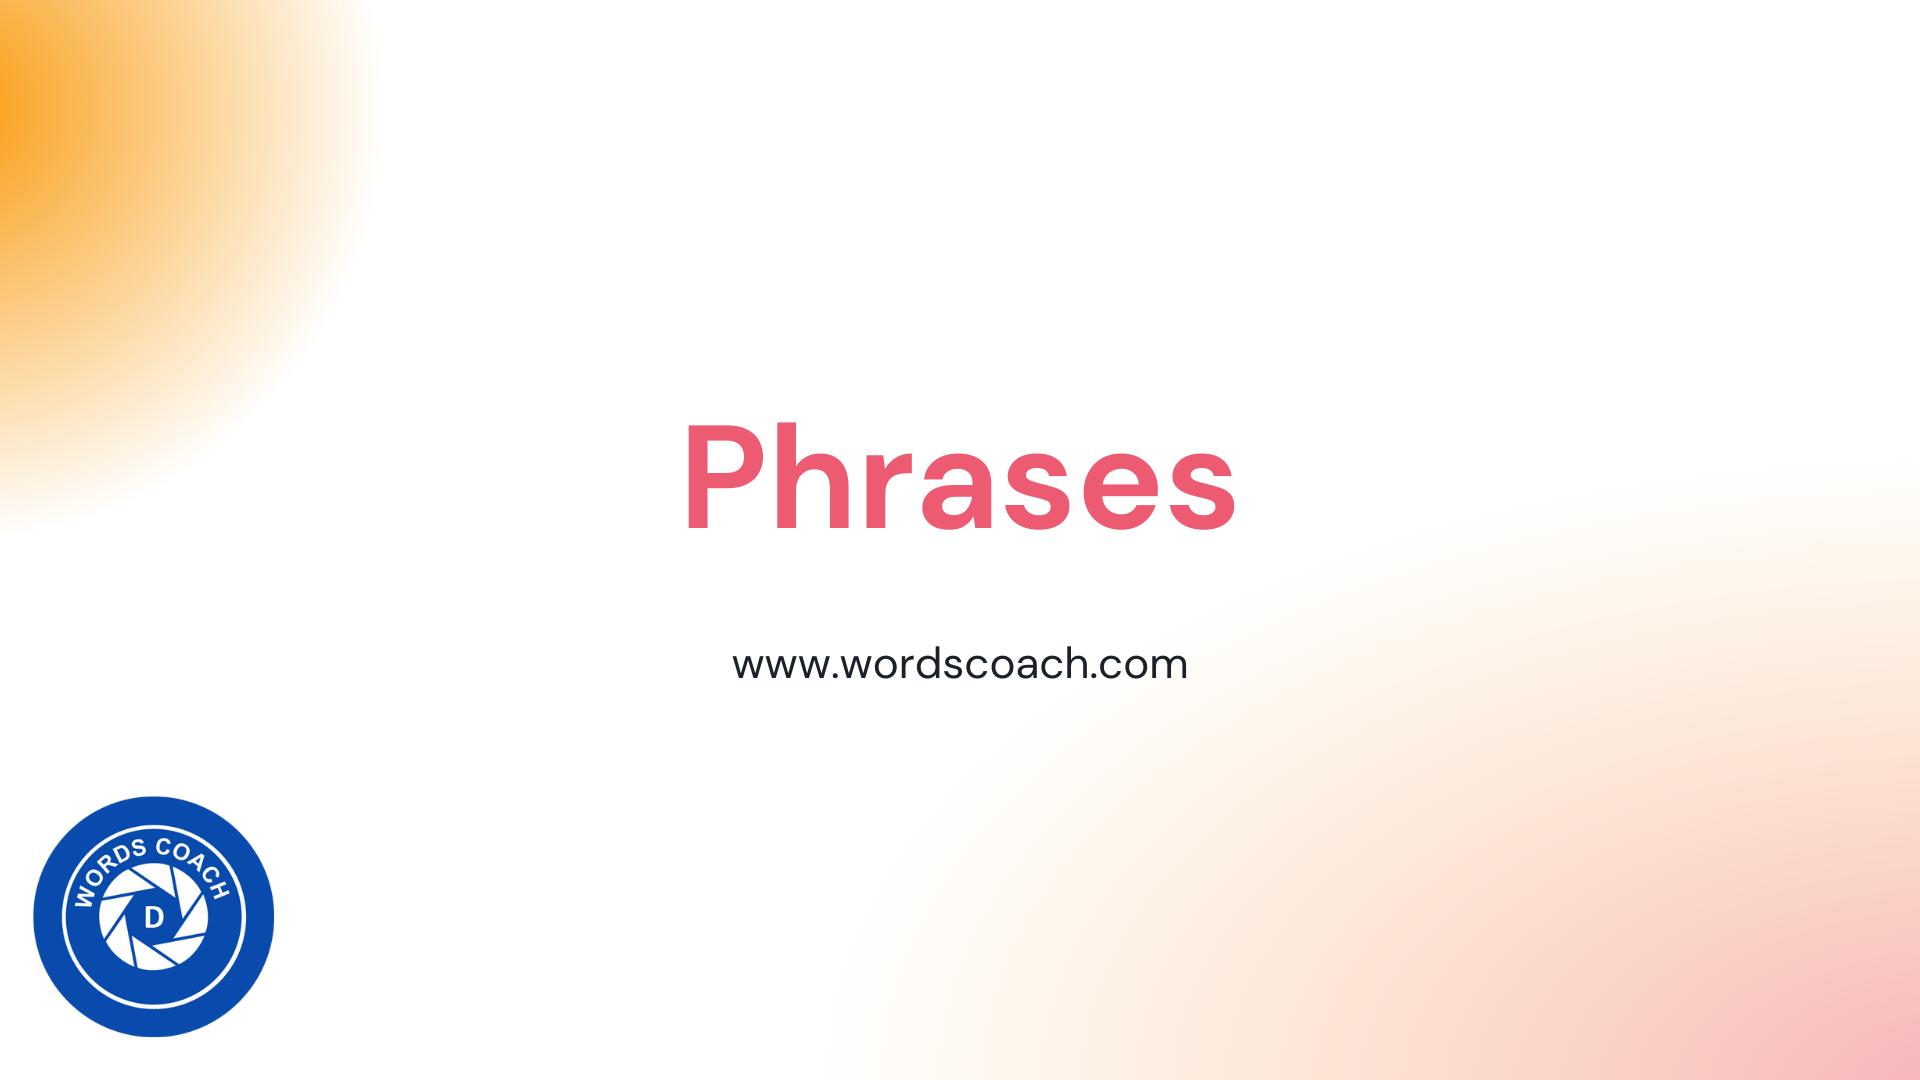 Phrases by Category